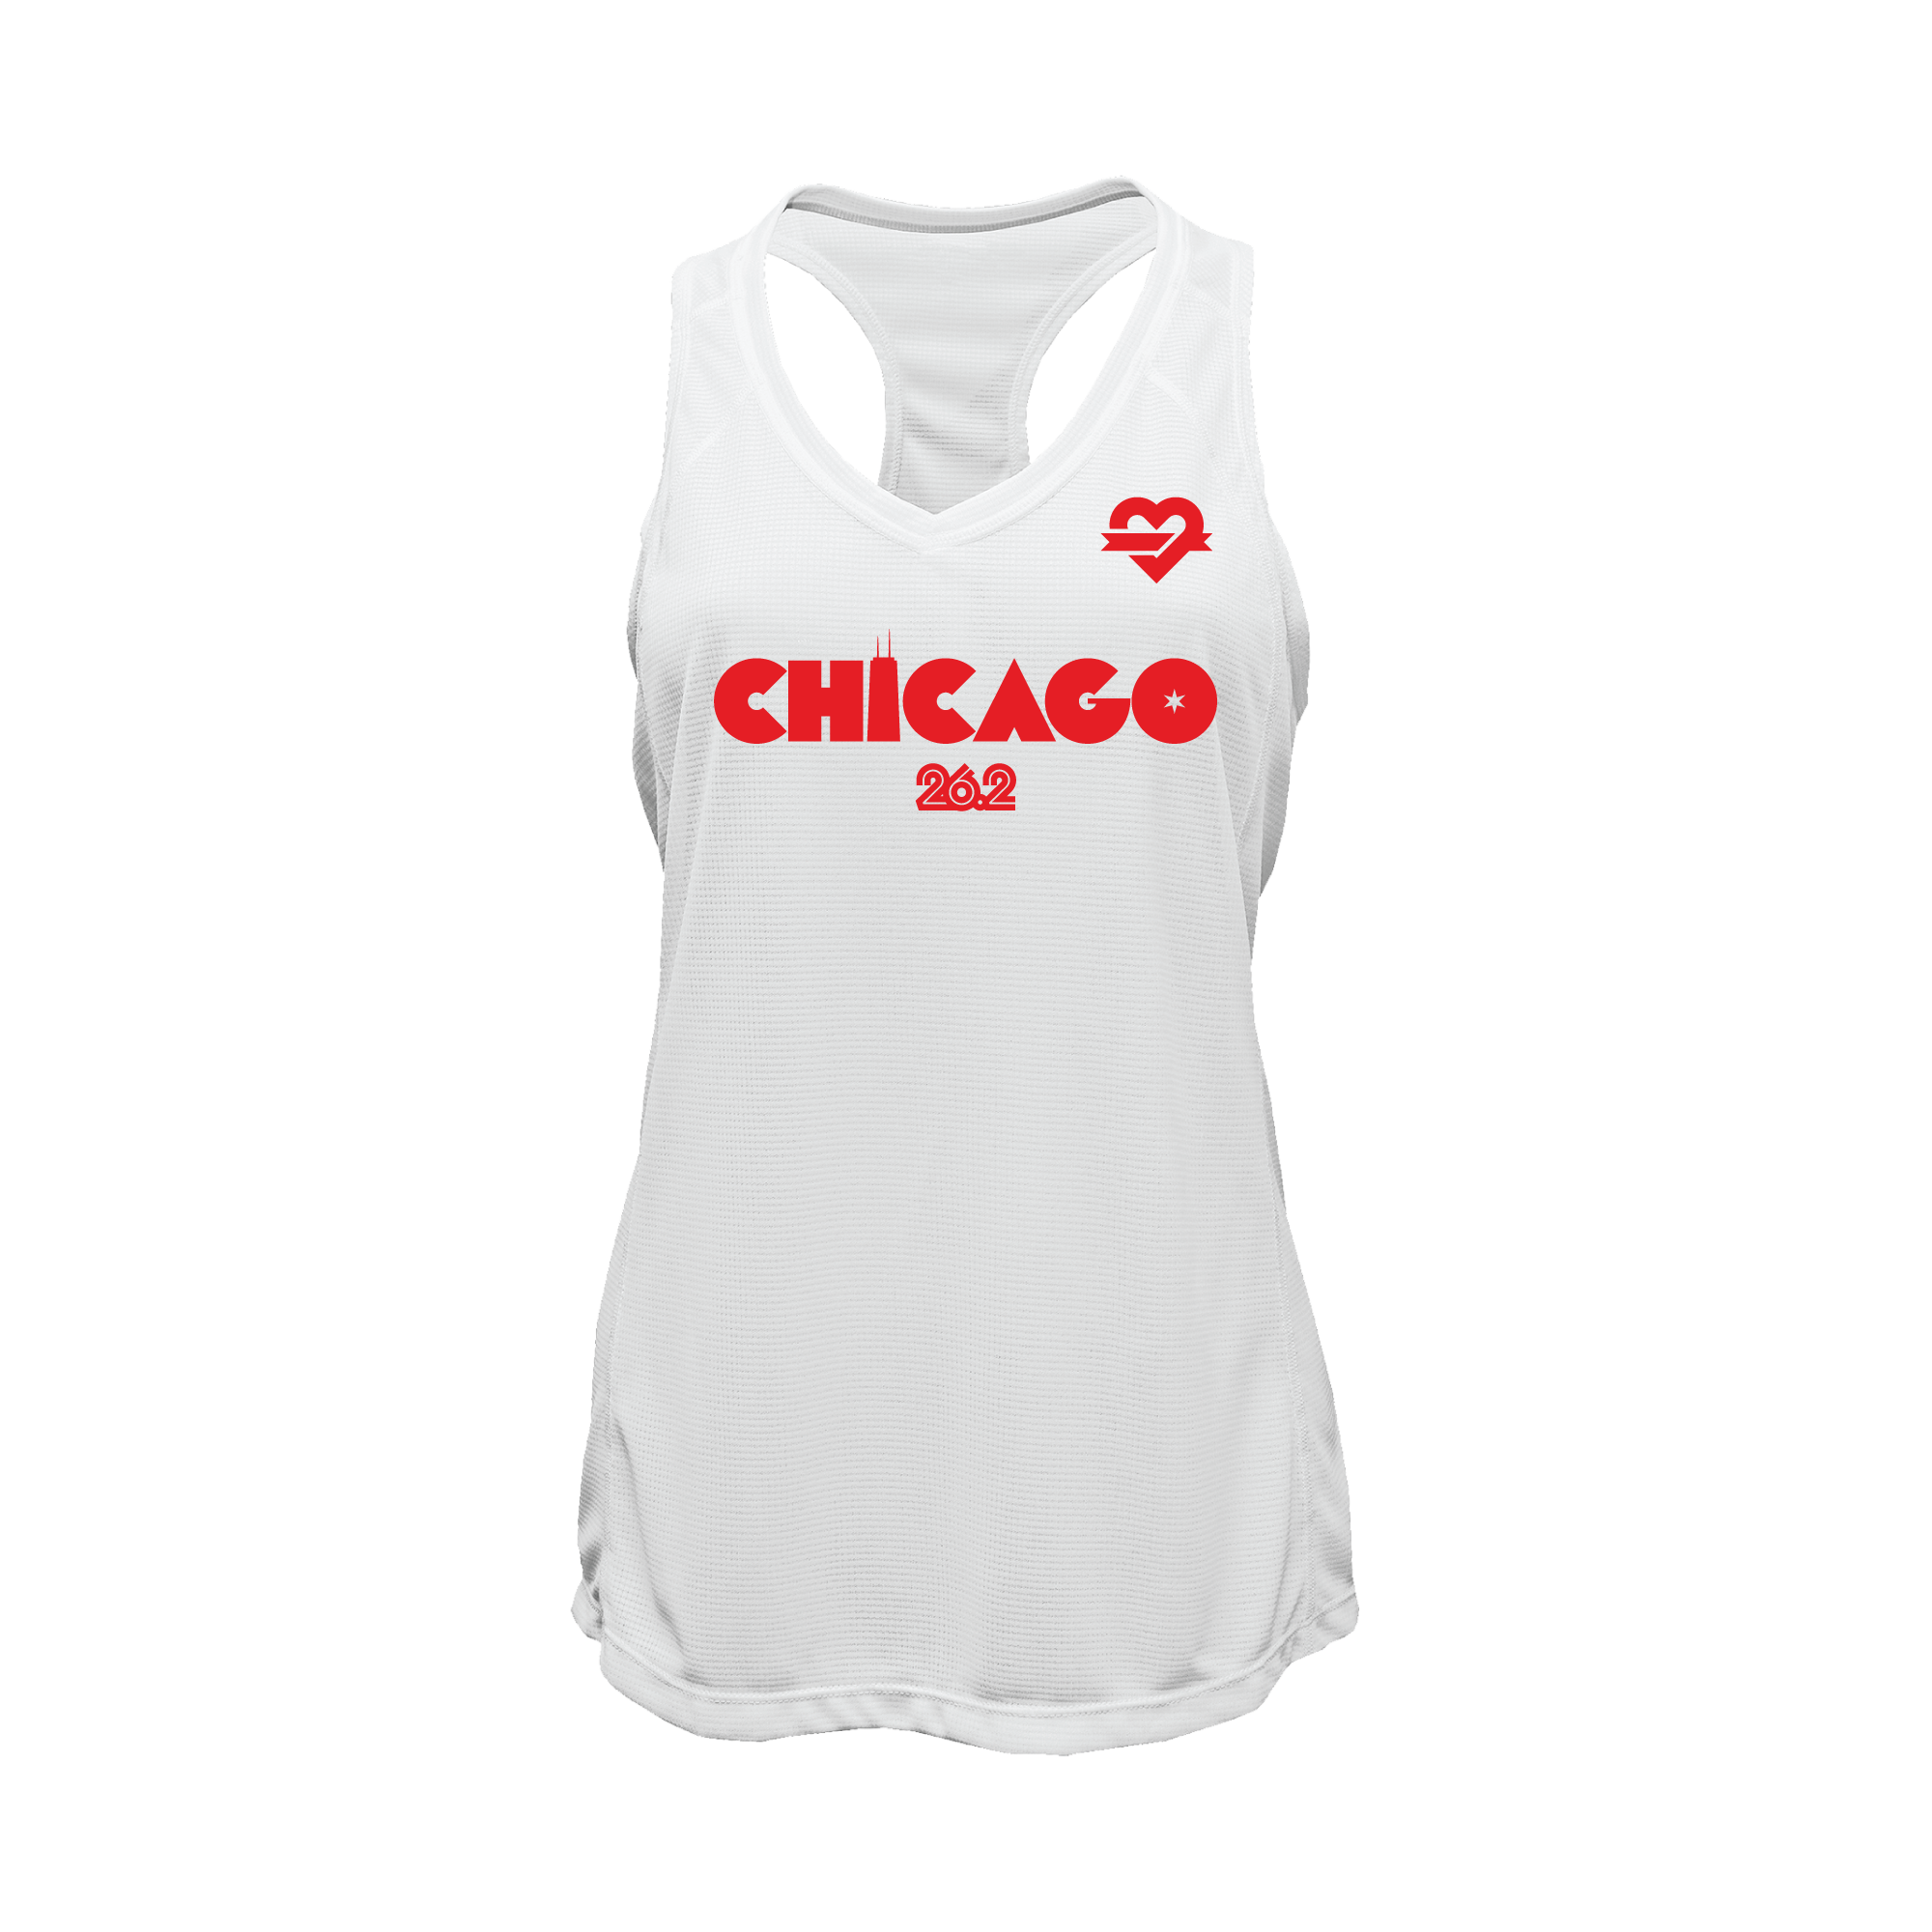 Chicago Performance Tank Womens For The Run 